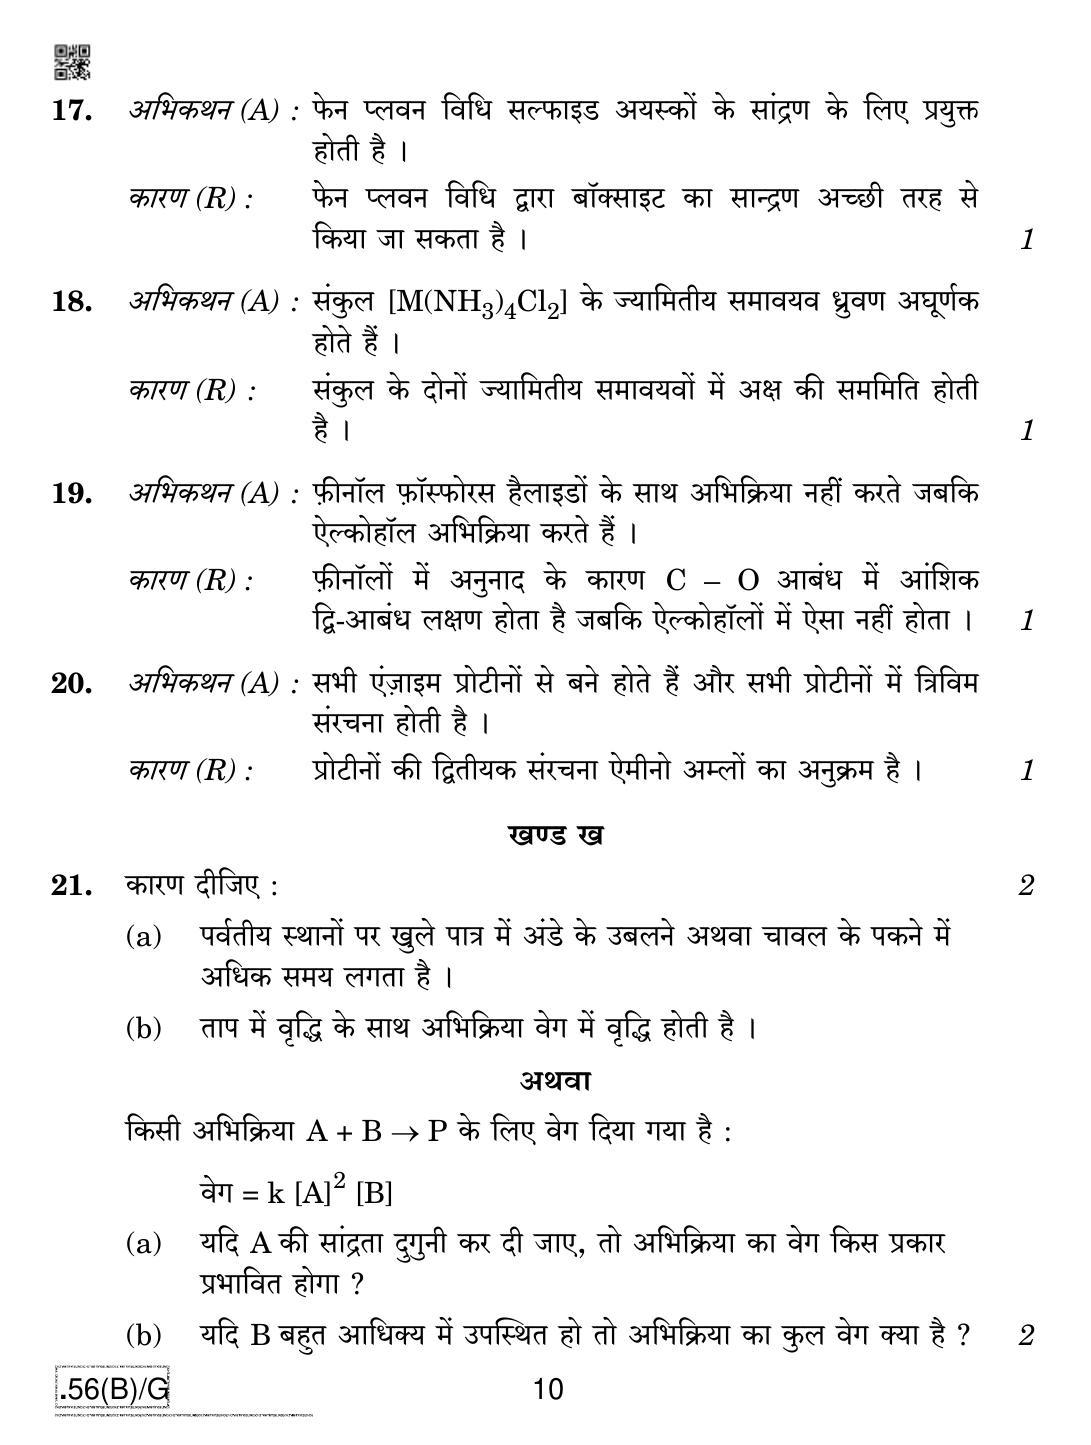 CBSE Class 12 56(B)-C - Chemistry For Blind Candidates 2020 Compartment Question Paper - Page 10